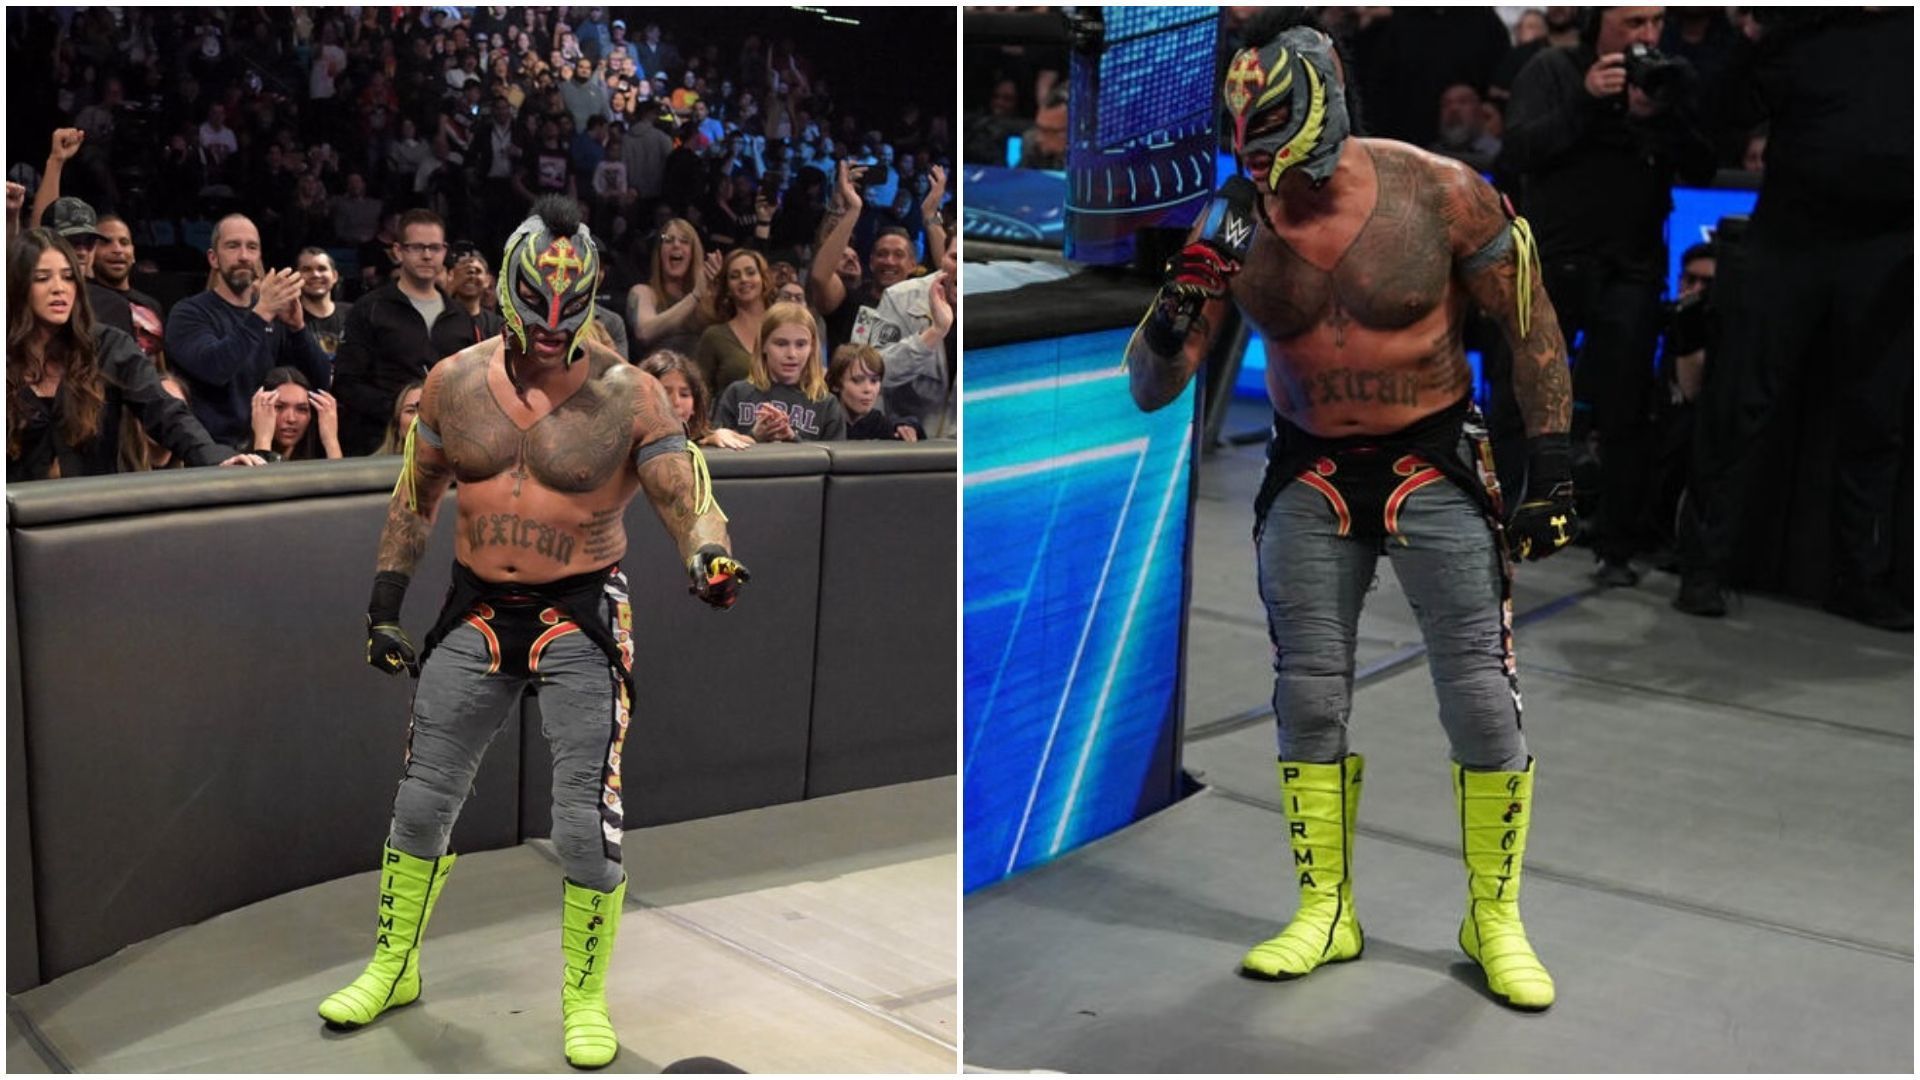 Rey Mysterio is a former WWE Champion. (Image source: WWE.com)